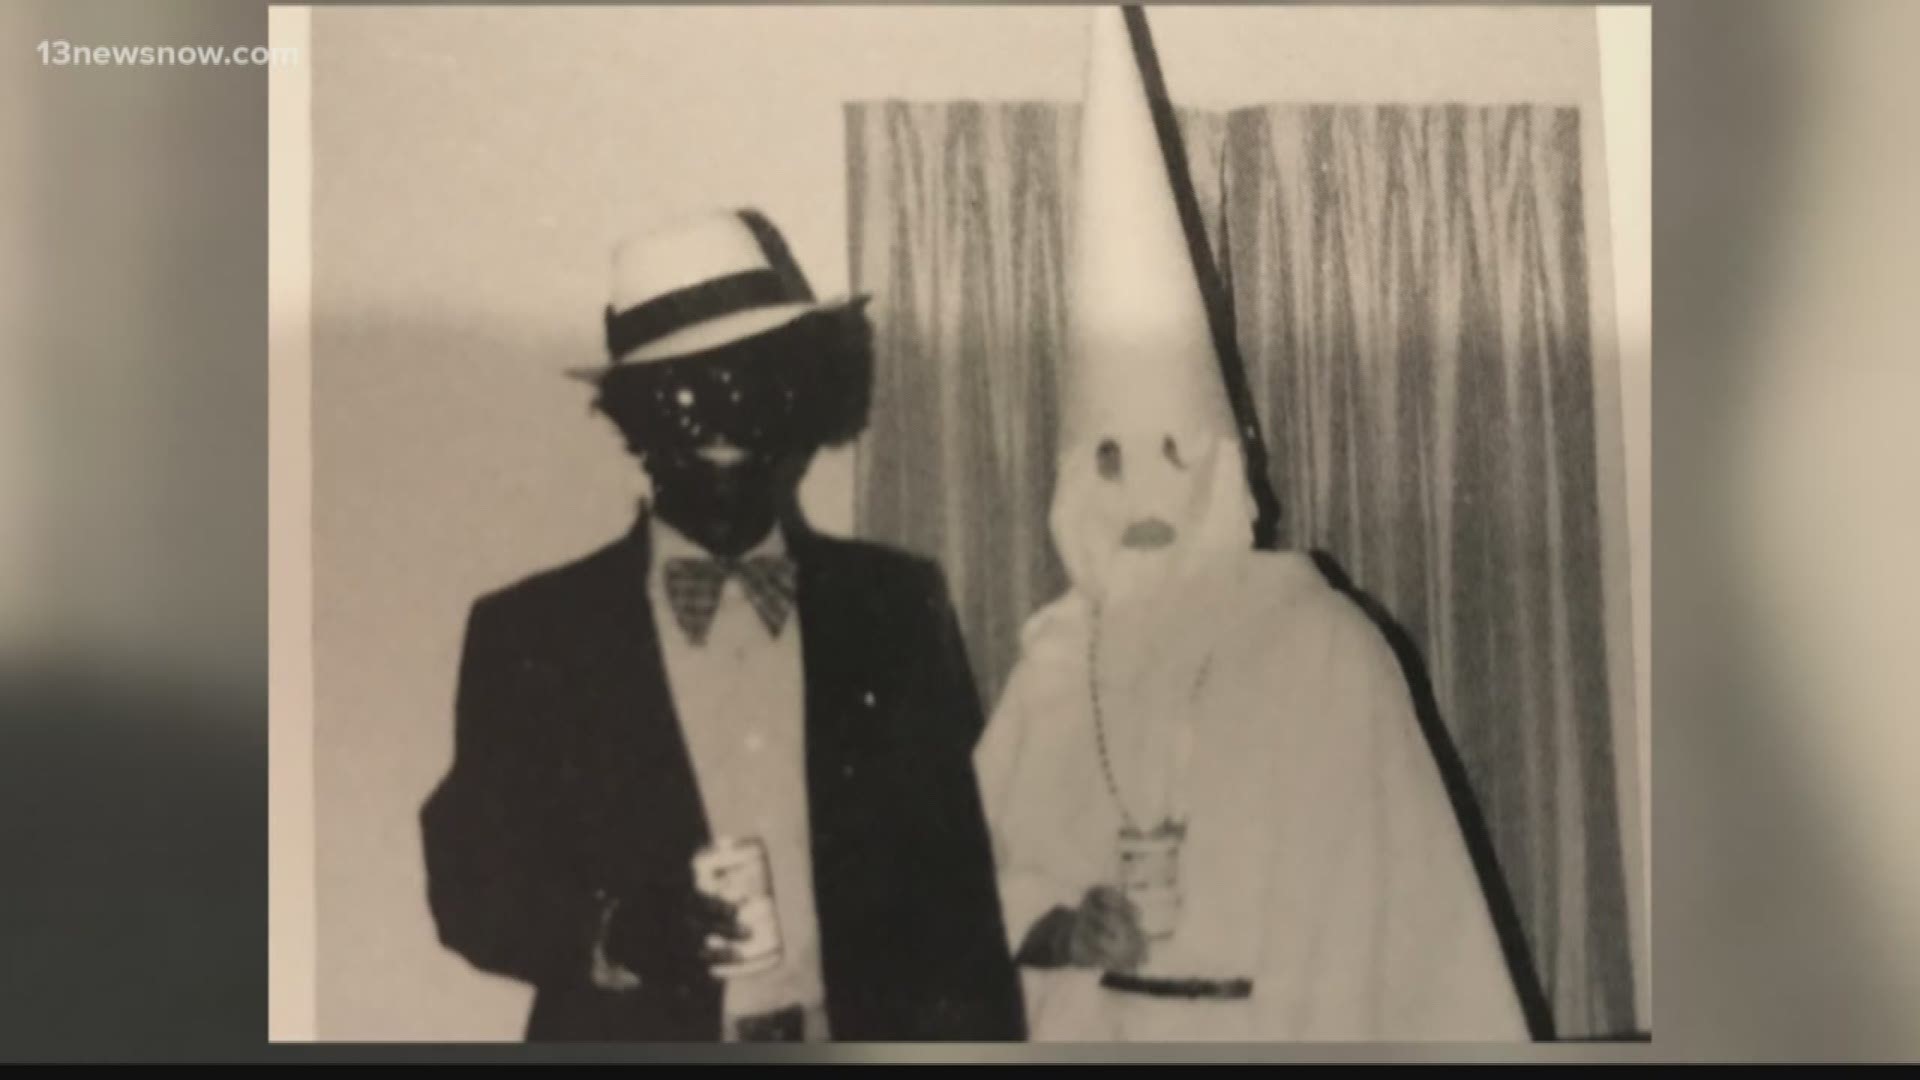 Governor Ralph Northam admitted that he was one of the people in a racist photo and now people are calling for him to resign. A political analyst discusses the impacts this photo could have.